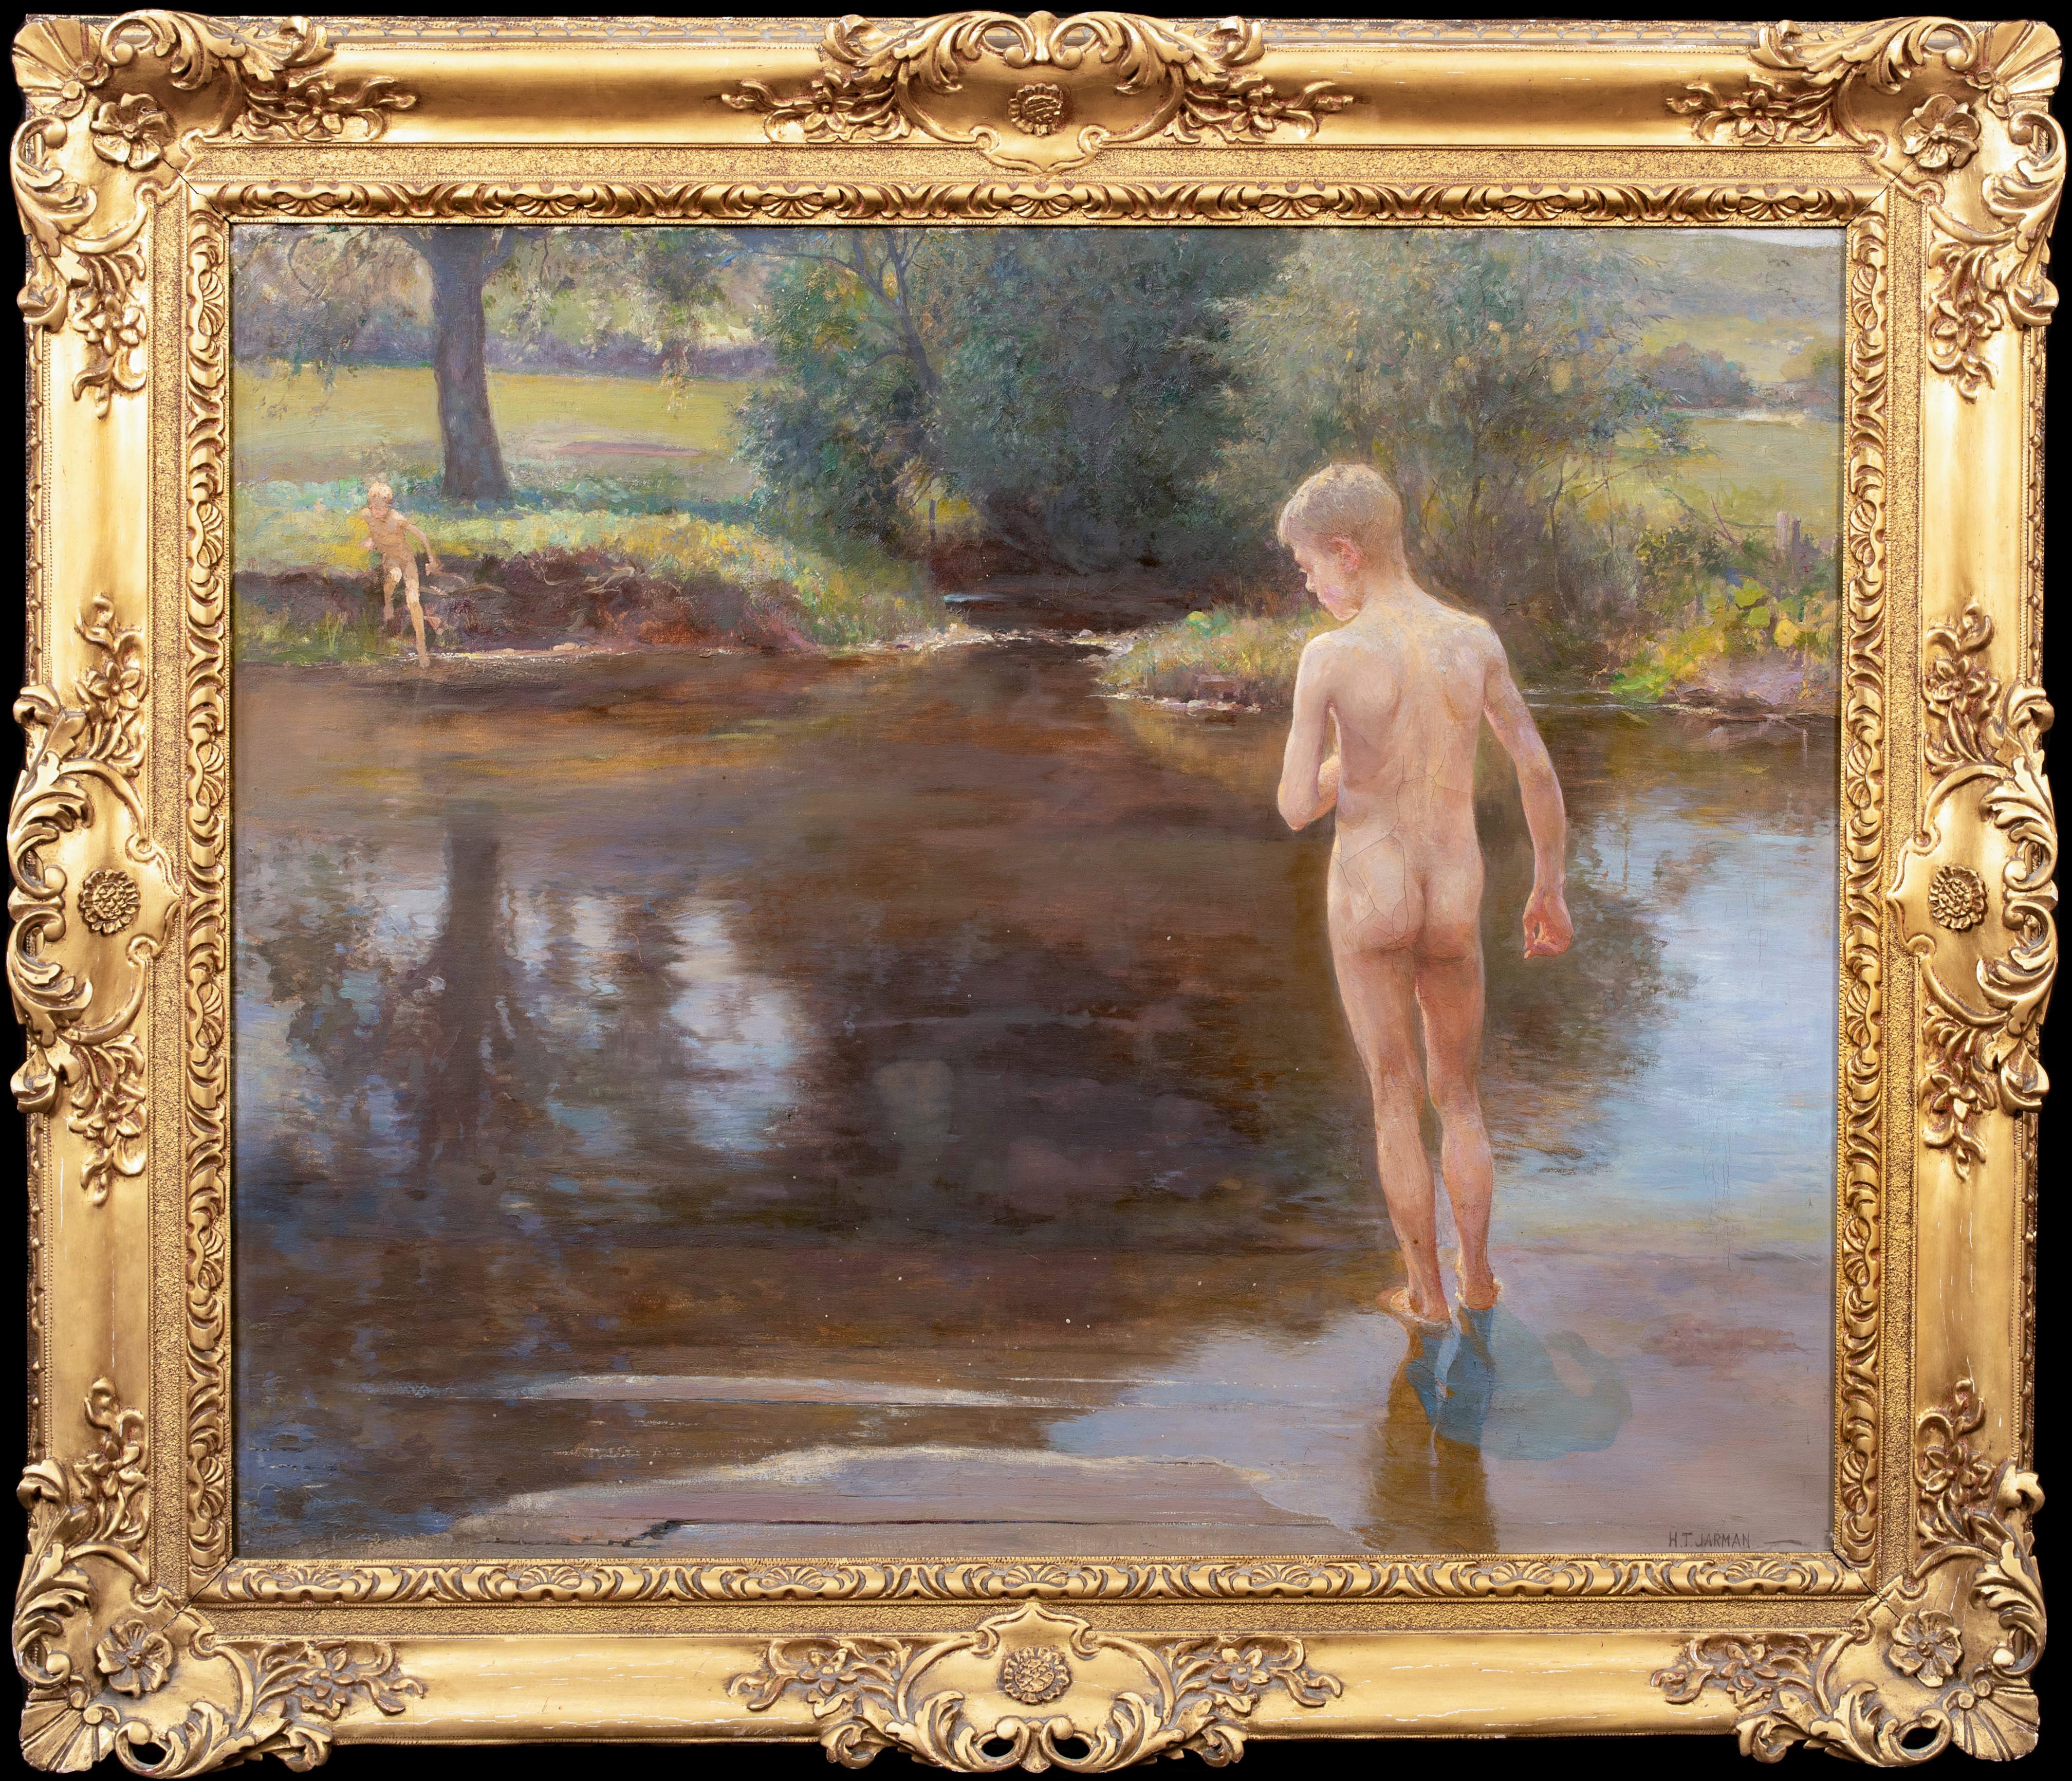 Unknown Landscape Painting - Nude Boys At A Lake, circa 1920  by Henry Thomas Jarman (1871-1956)